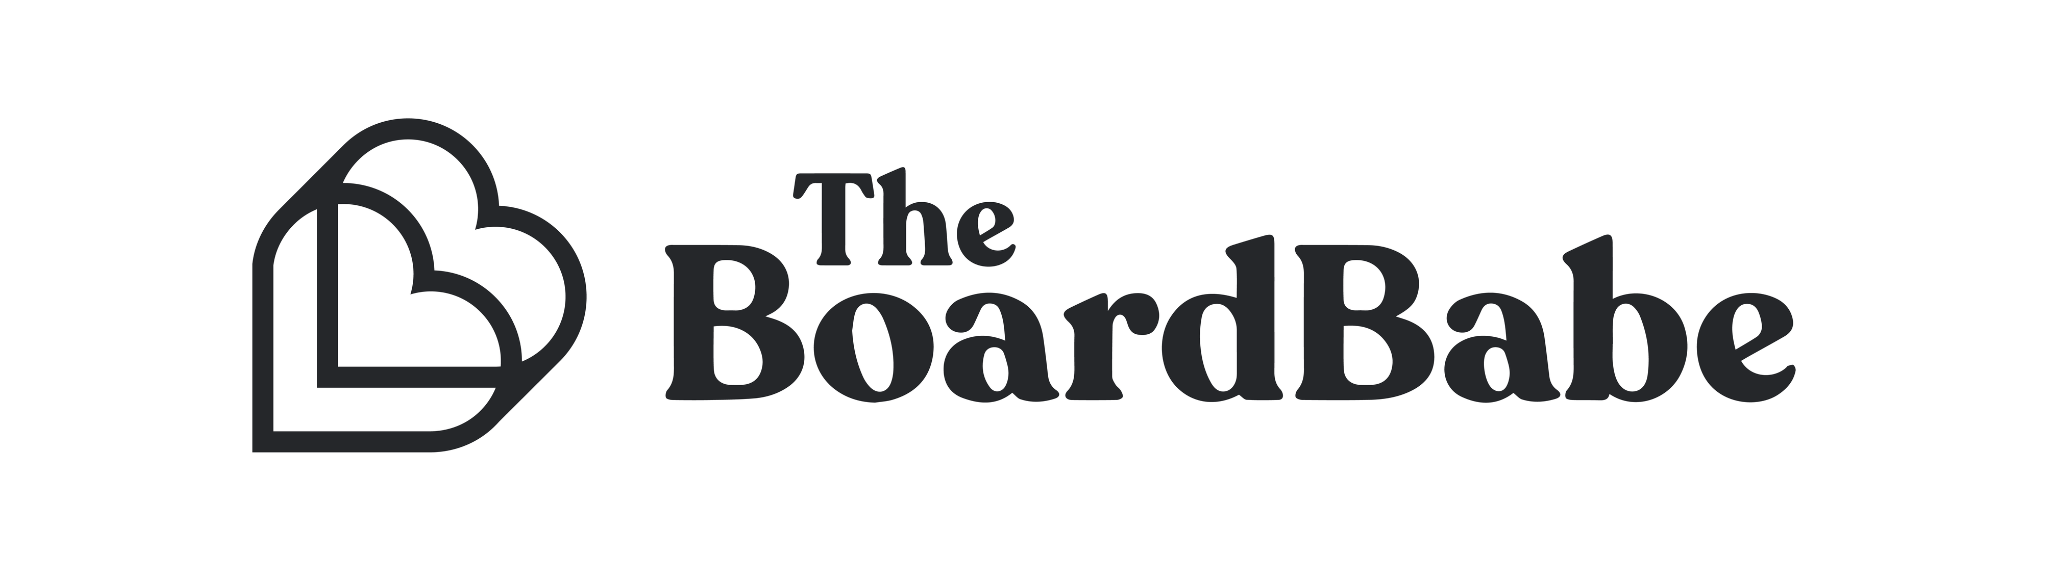 The Board Babe